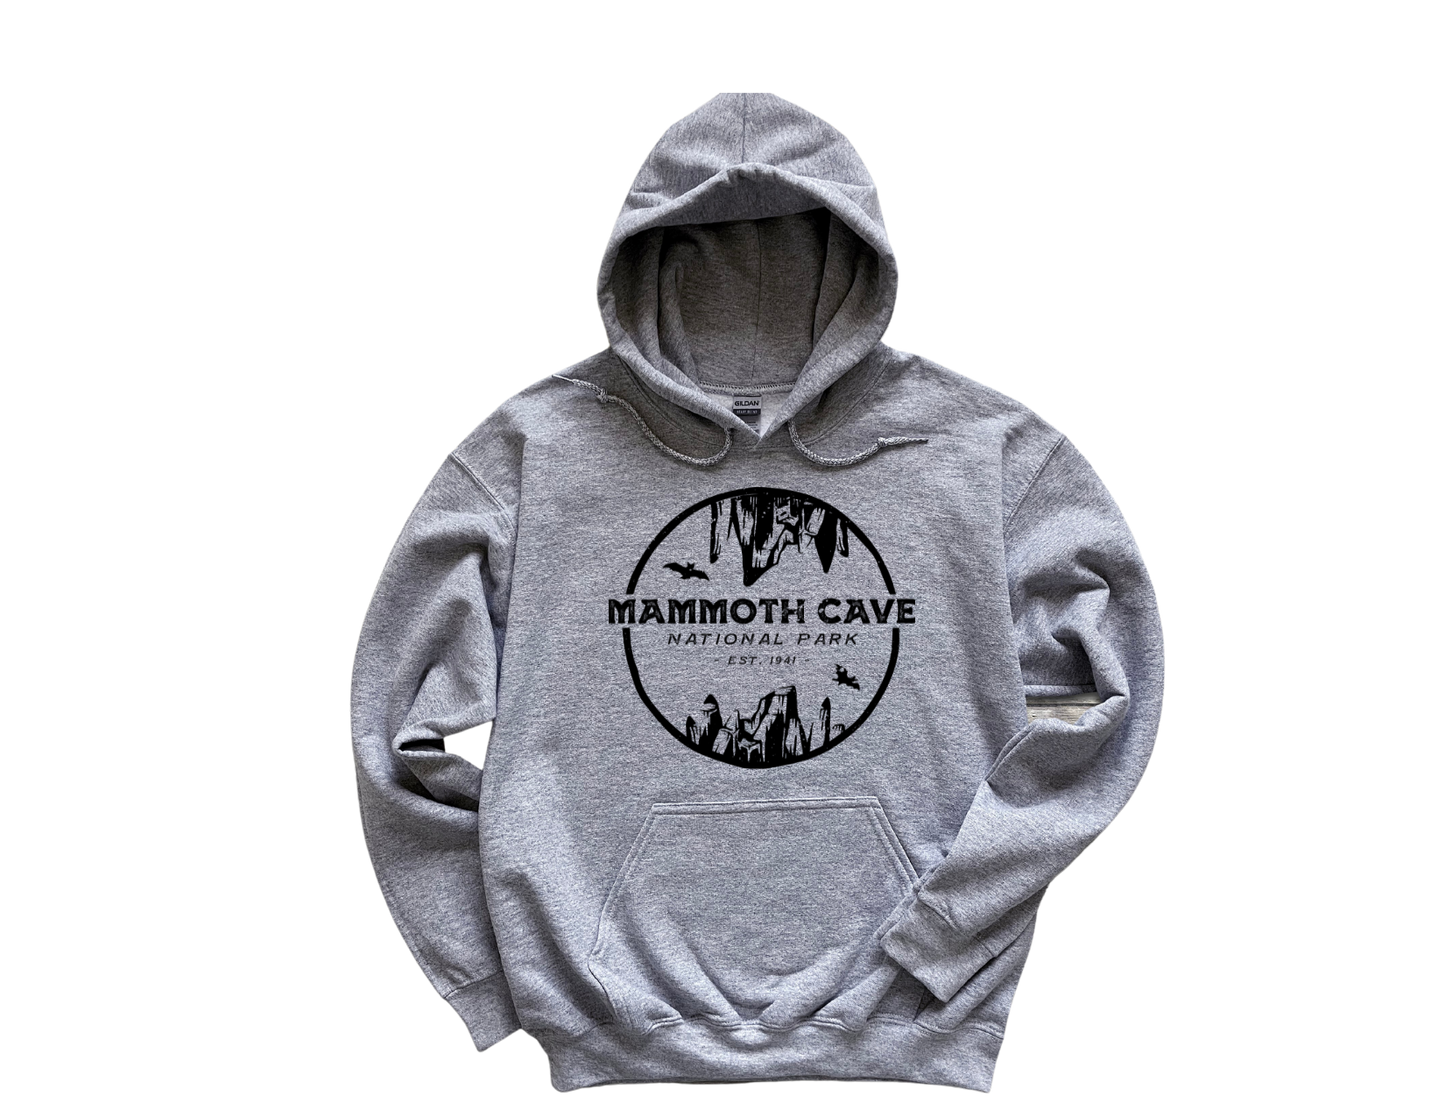 Mammoth Cave National Park Unisex Hoodie